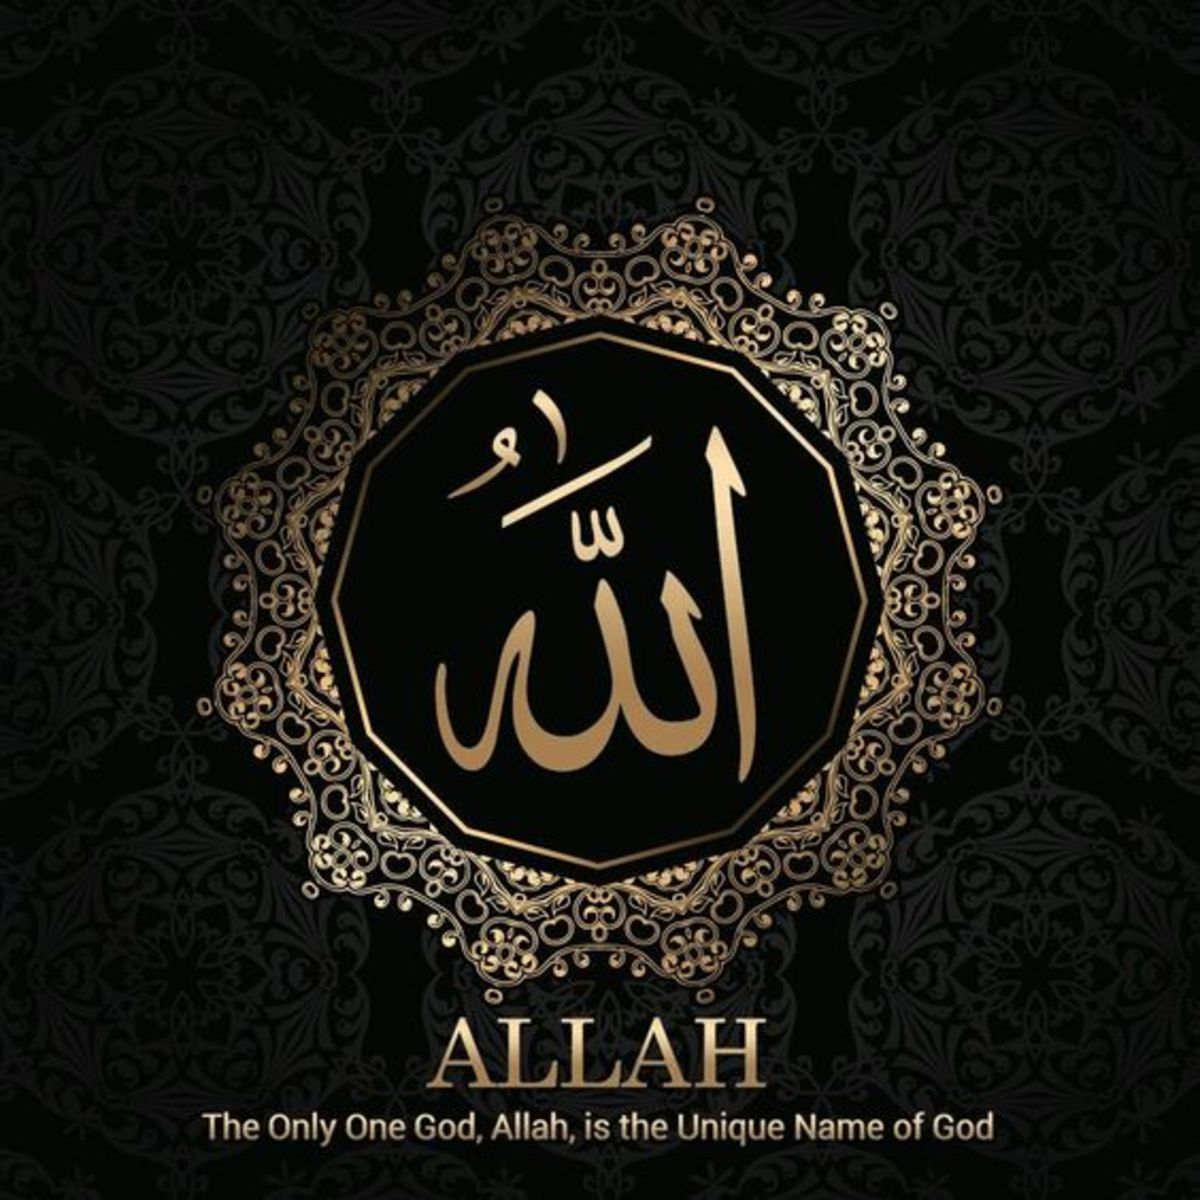 The First Five of Allah's Ninety-Nine Beautiful Names